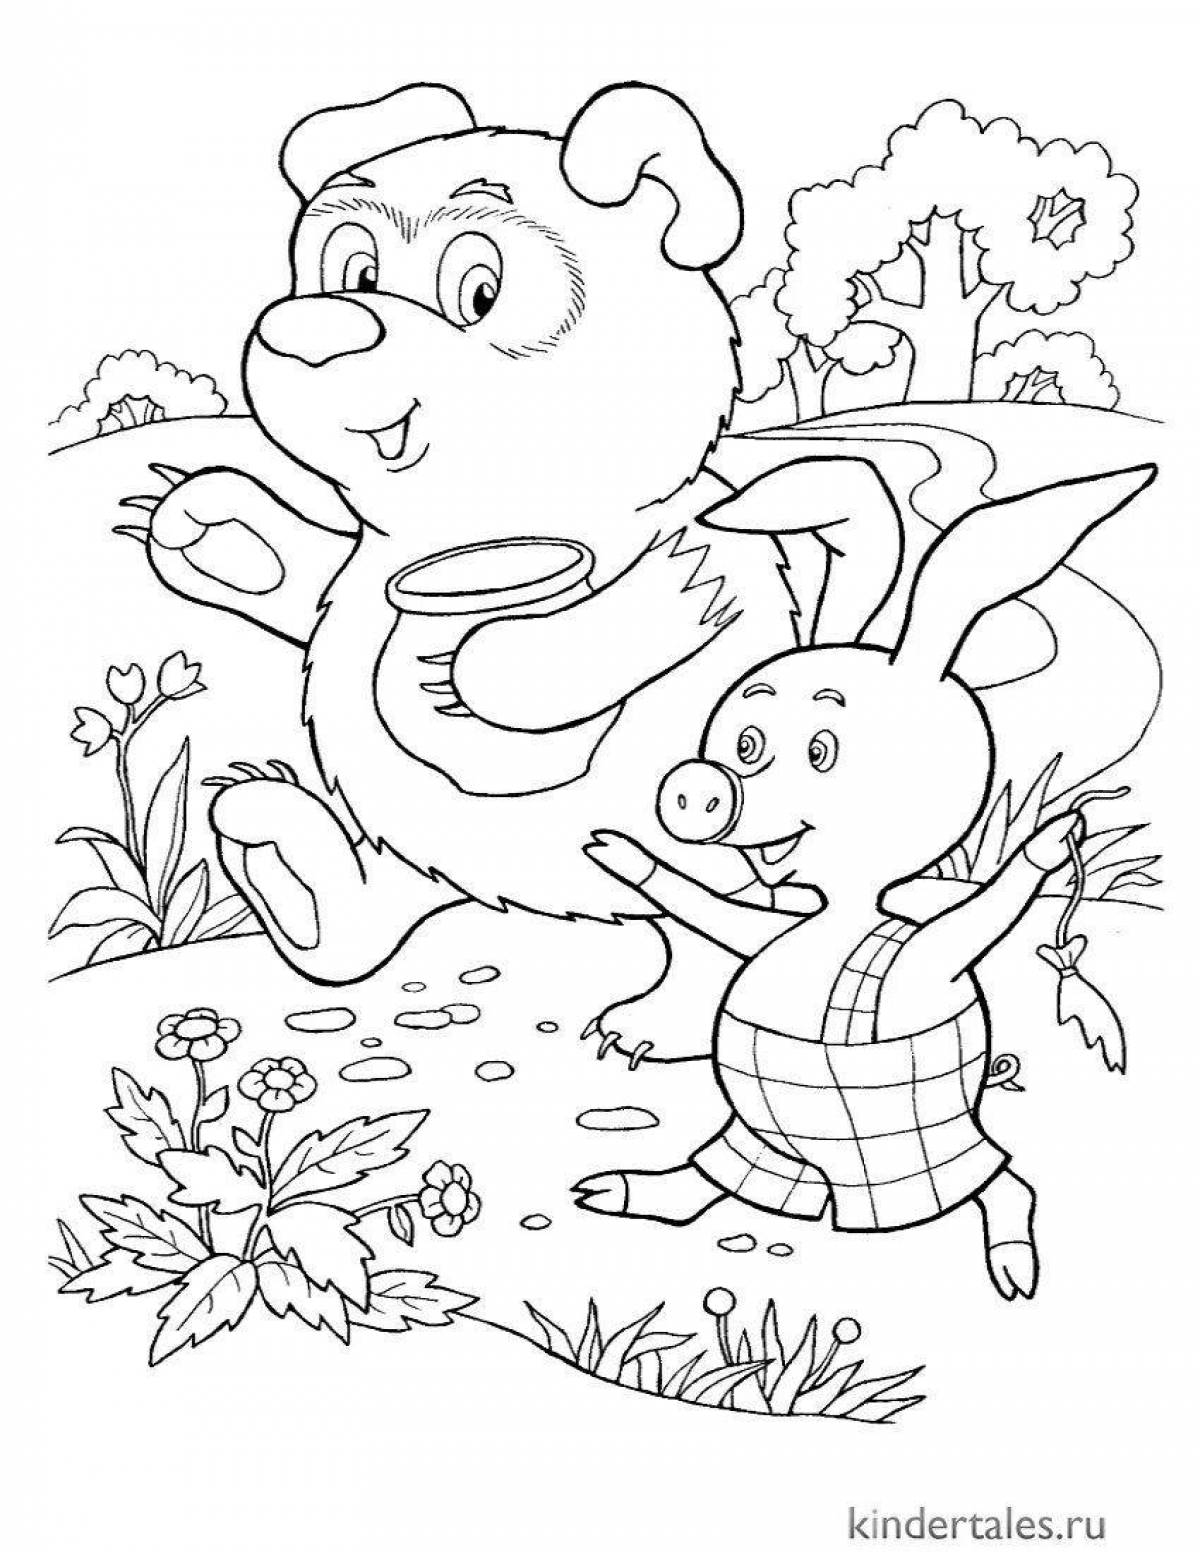 Luminous coloring book for children from cartoons 5-6 years old